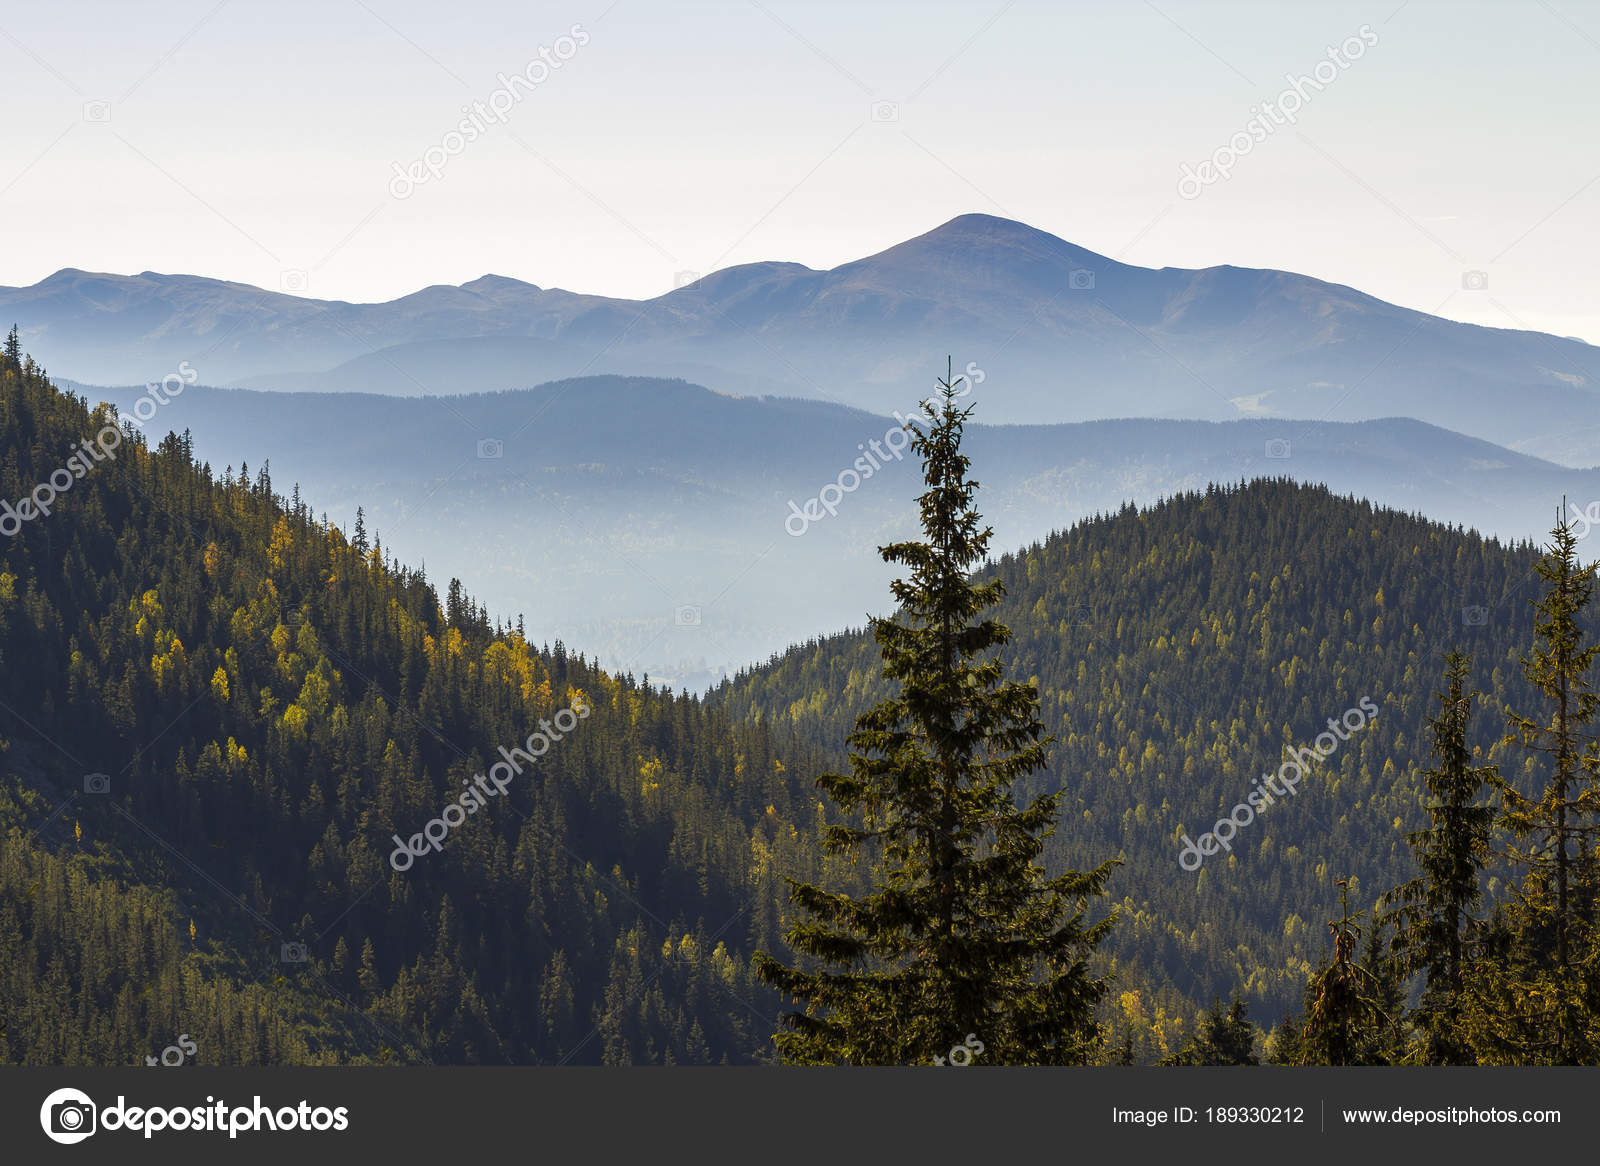 Landscape View Of Mountain Peak And Green Pine Trees Mountain